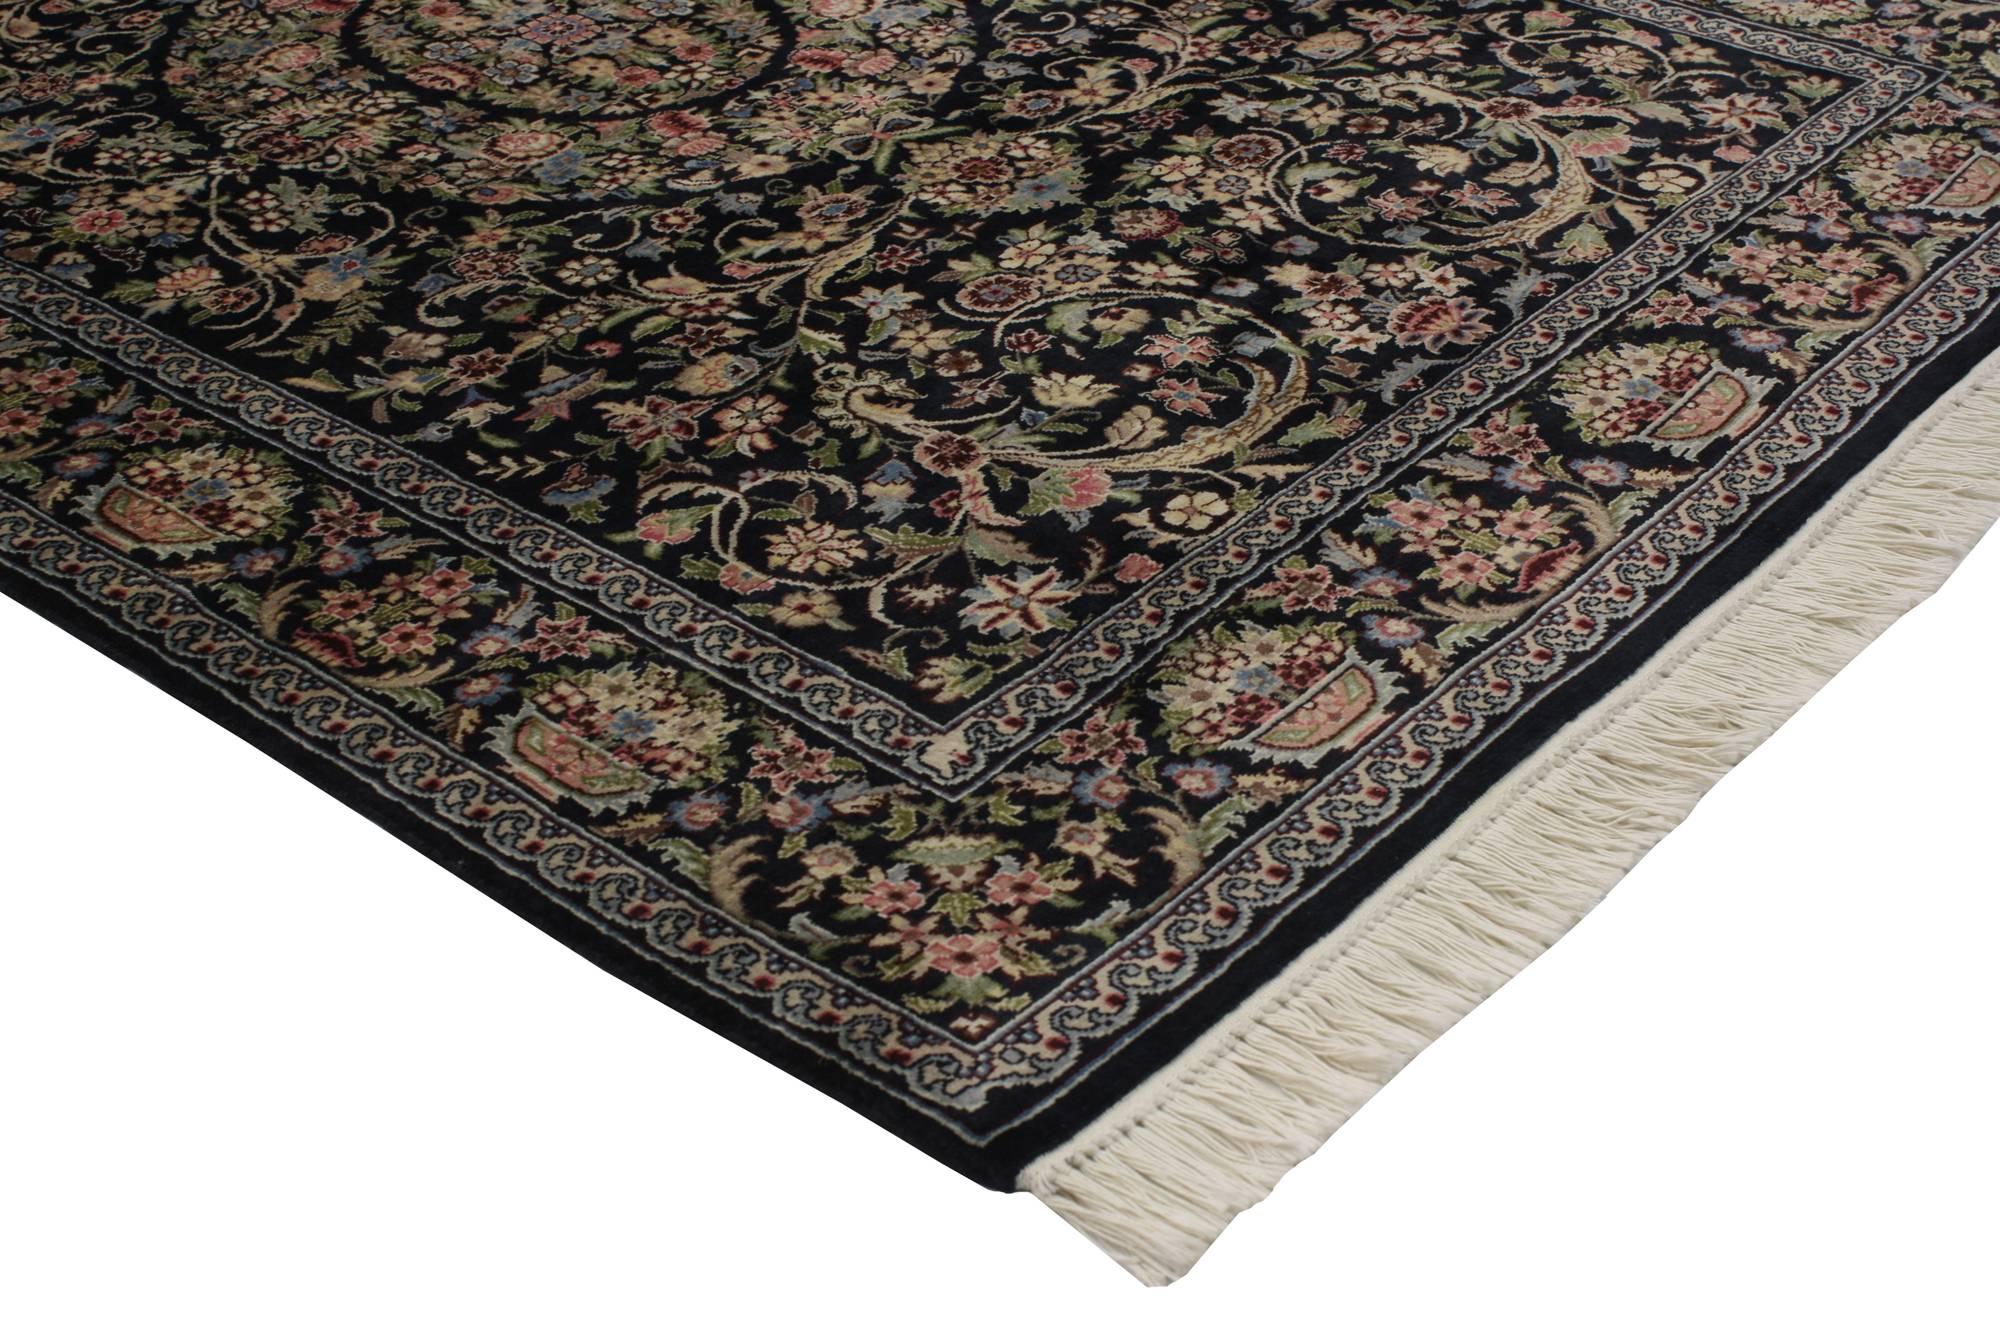 Pakistani Vintage Aubusson Garden Area Rug with Baroque Floral Chintz Style